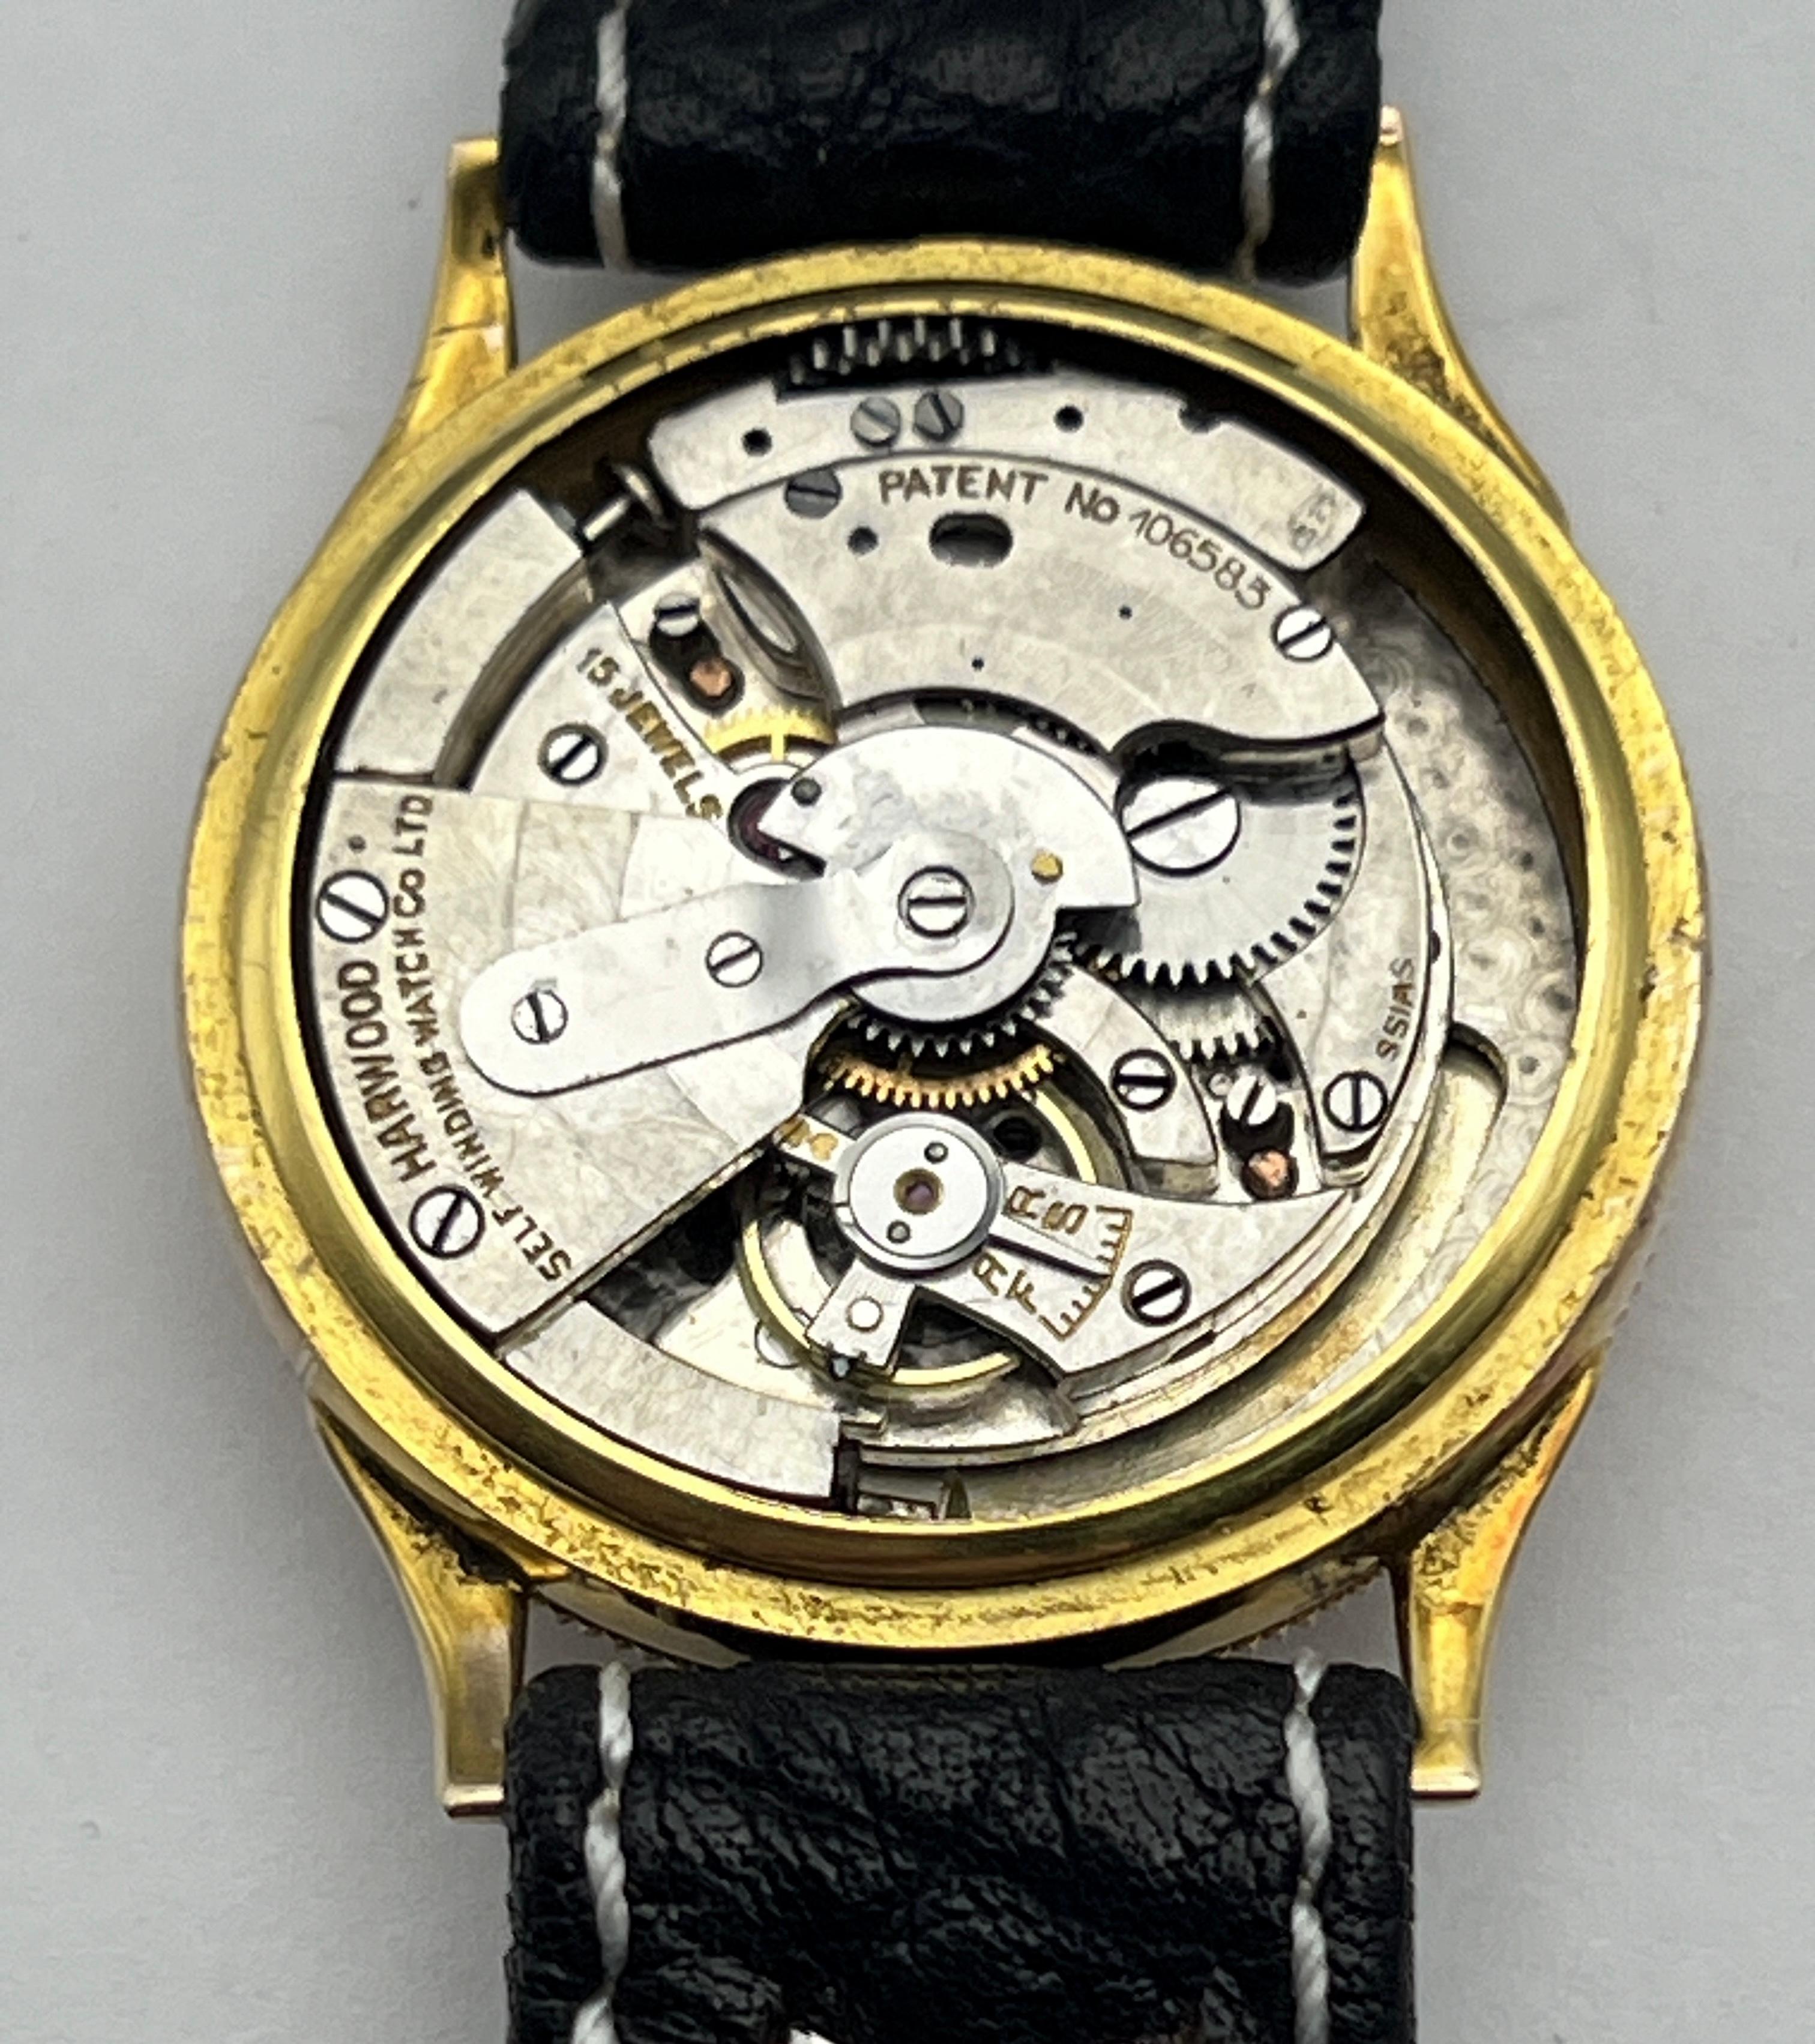 1920’s Solid Yellow Gold Harwood Bumper Automatic For Sale 3